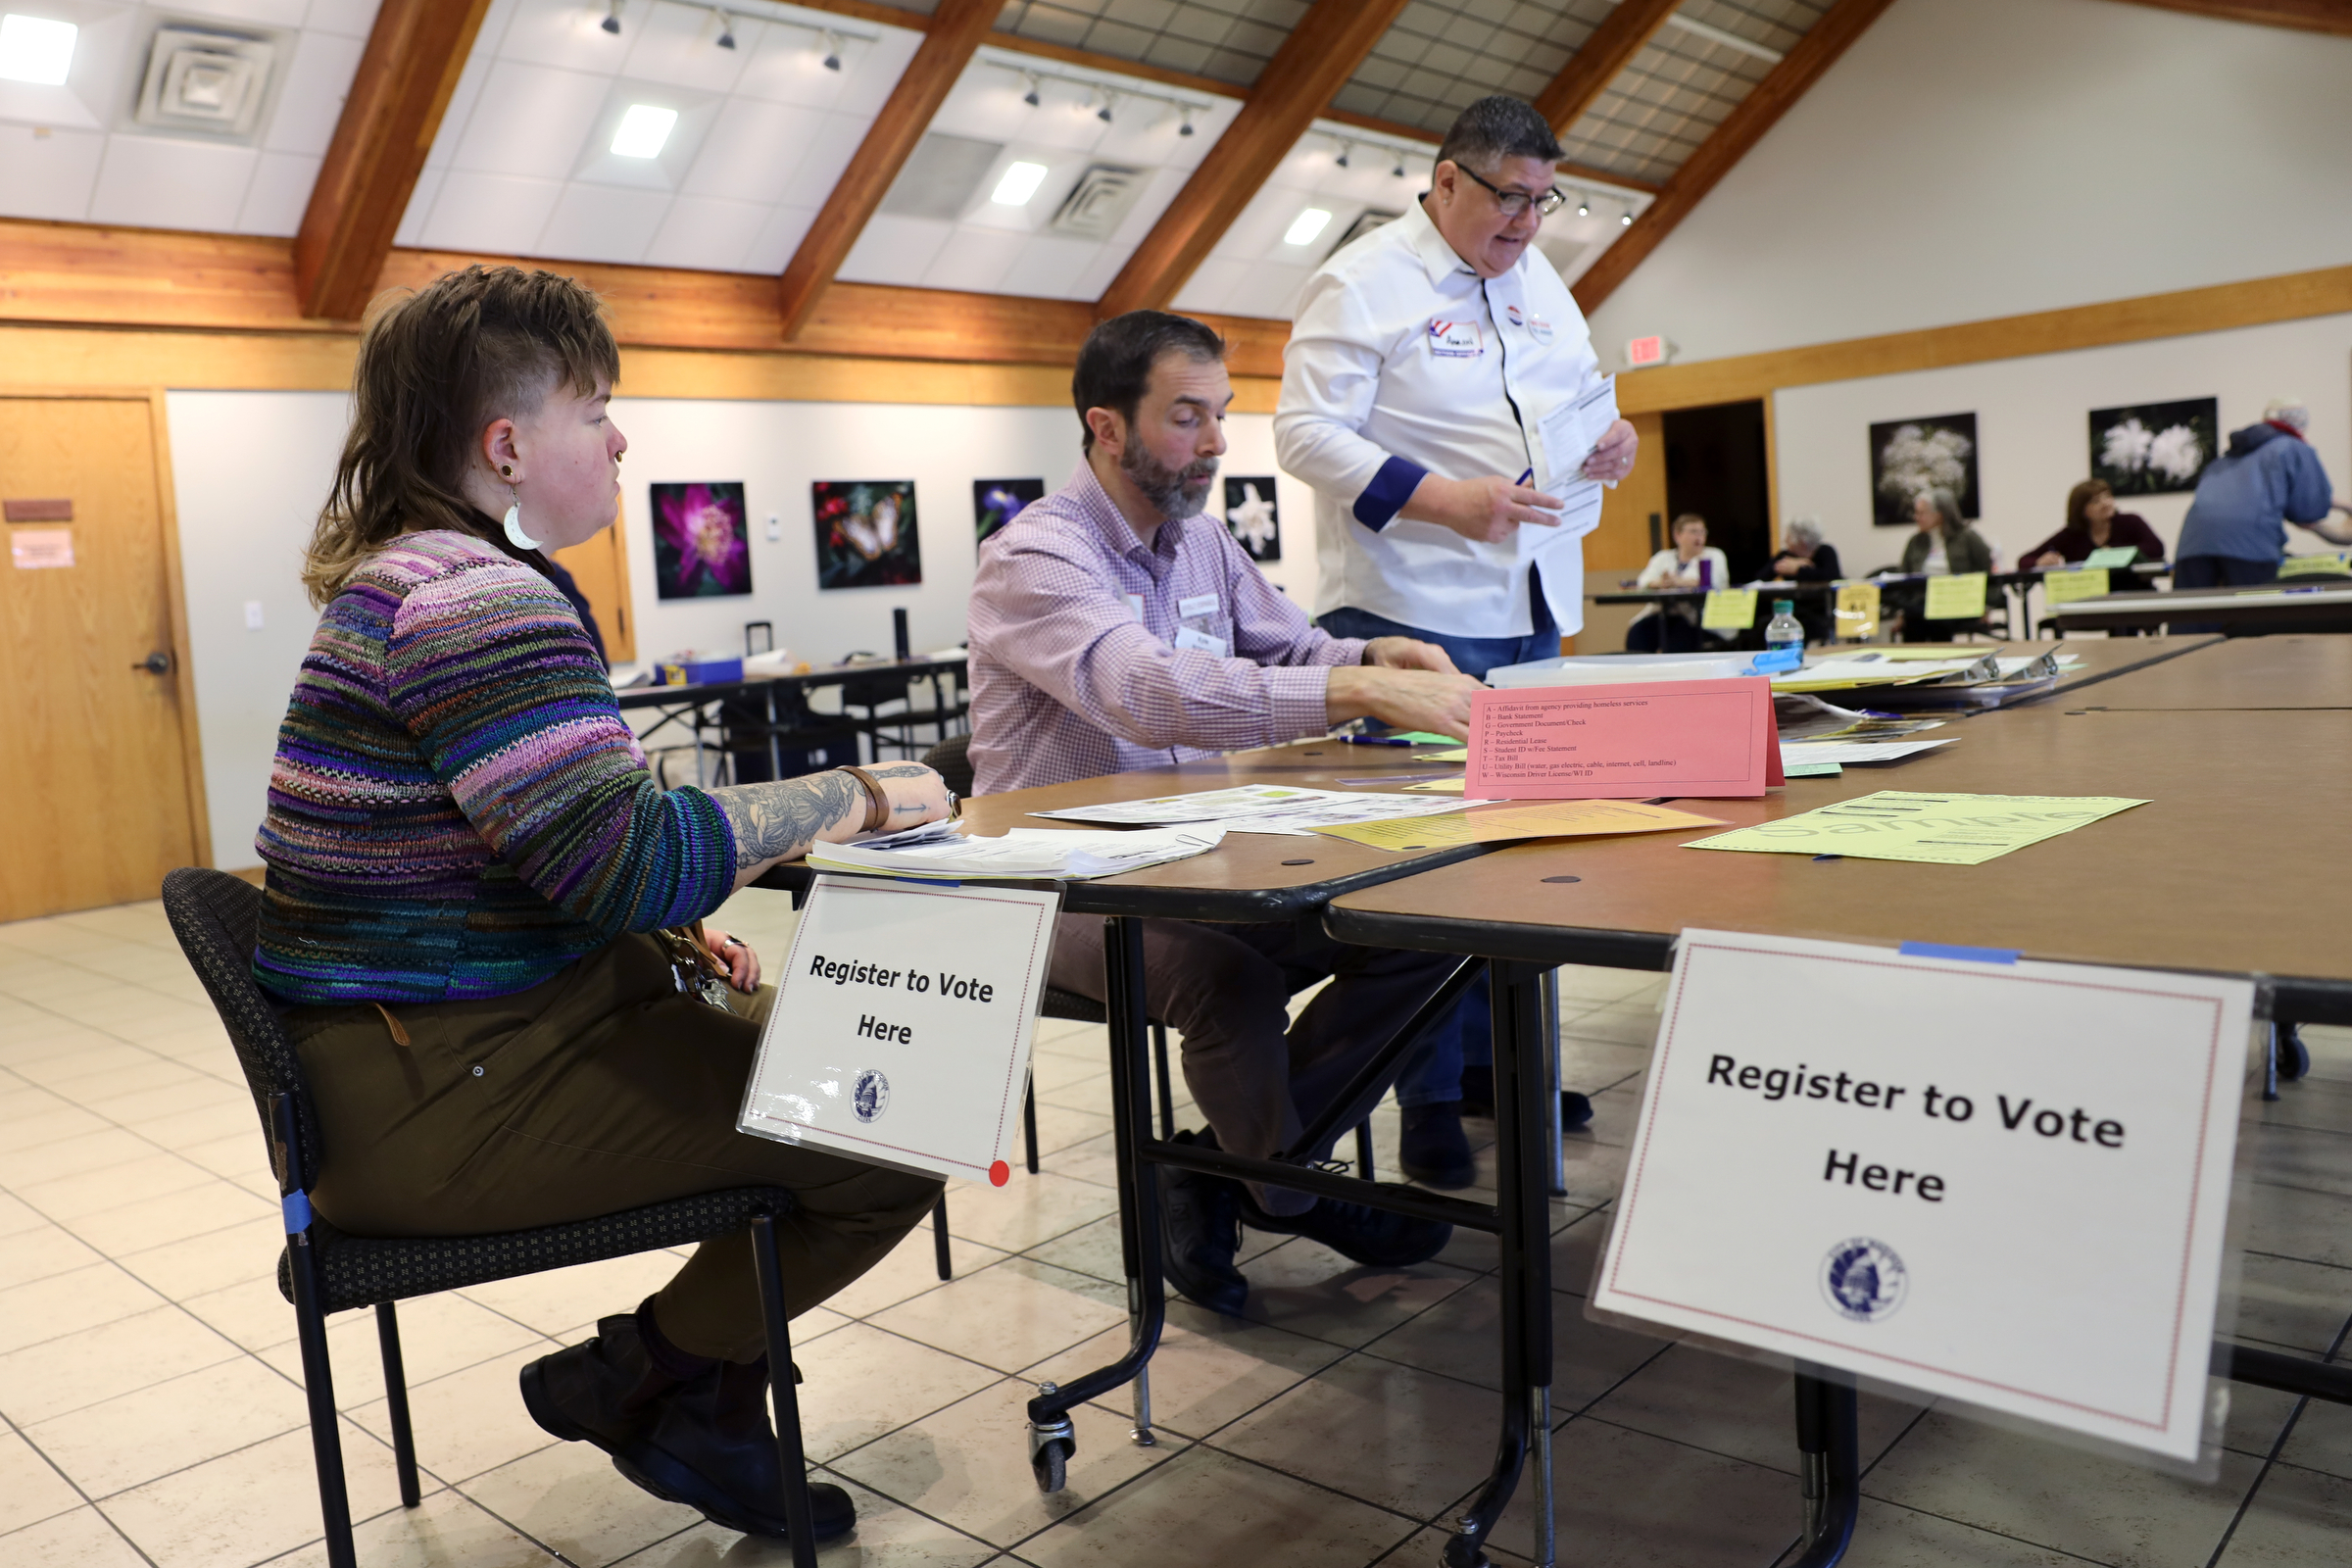 Voting in Wisconsin’s April primary? Today’s the last day to register online